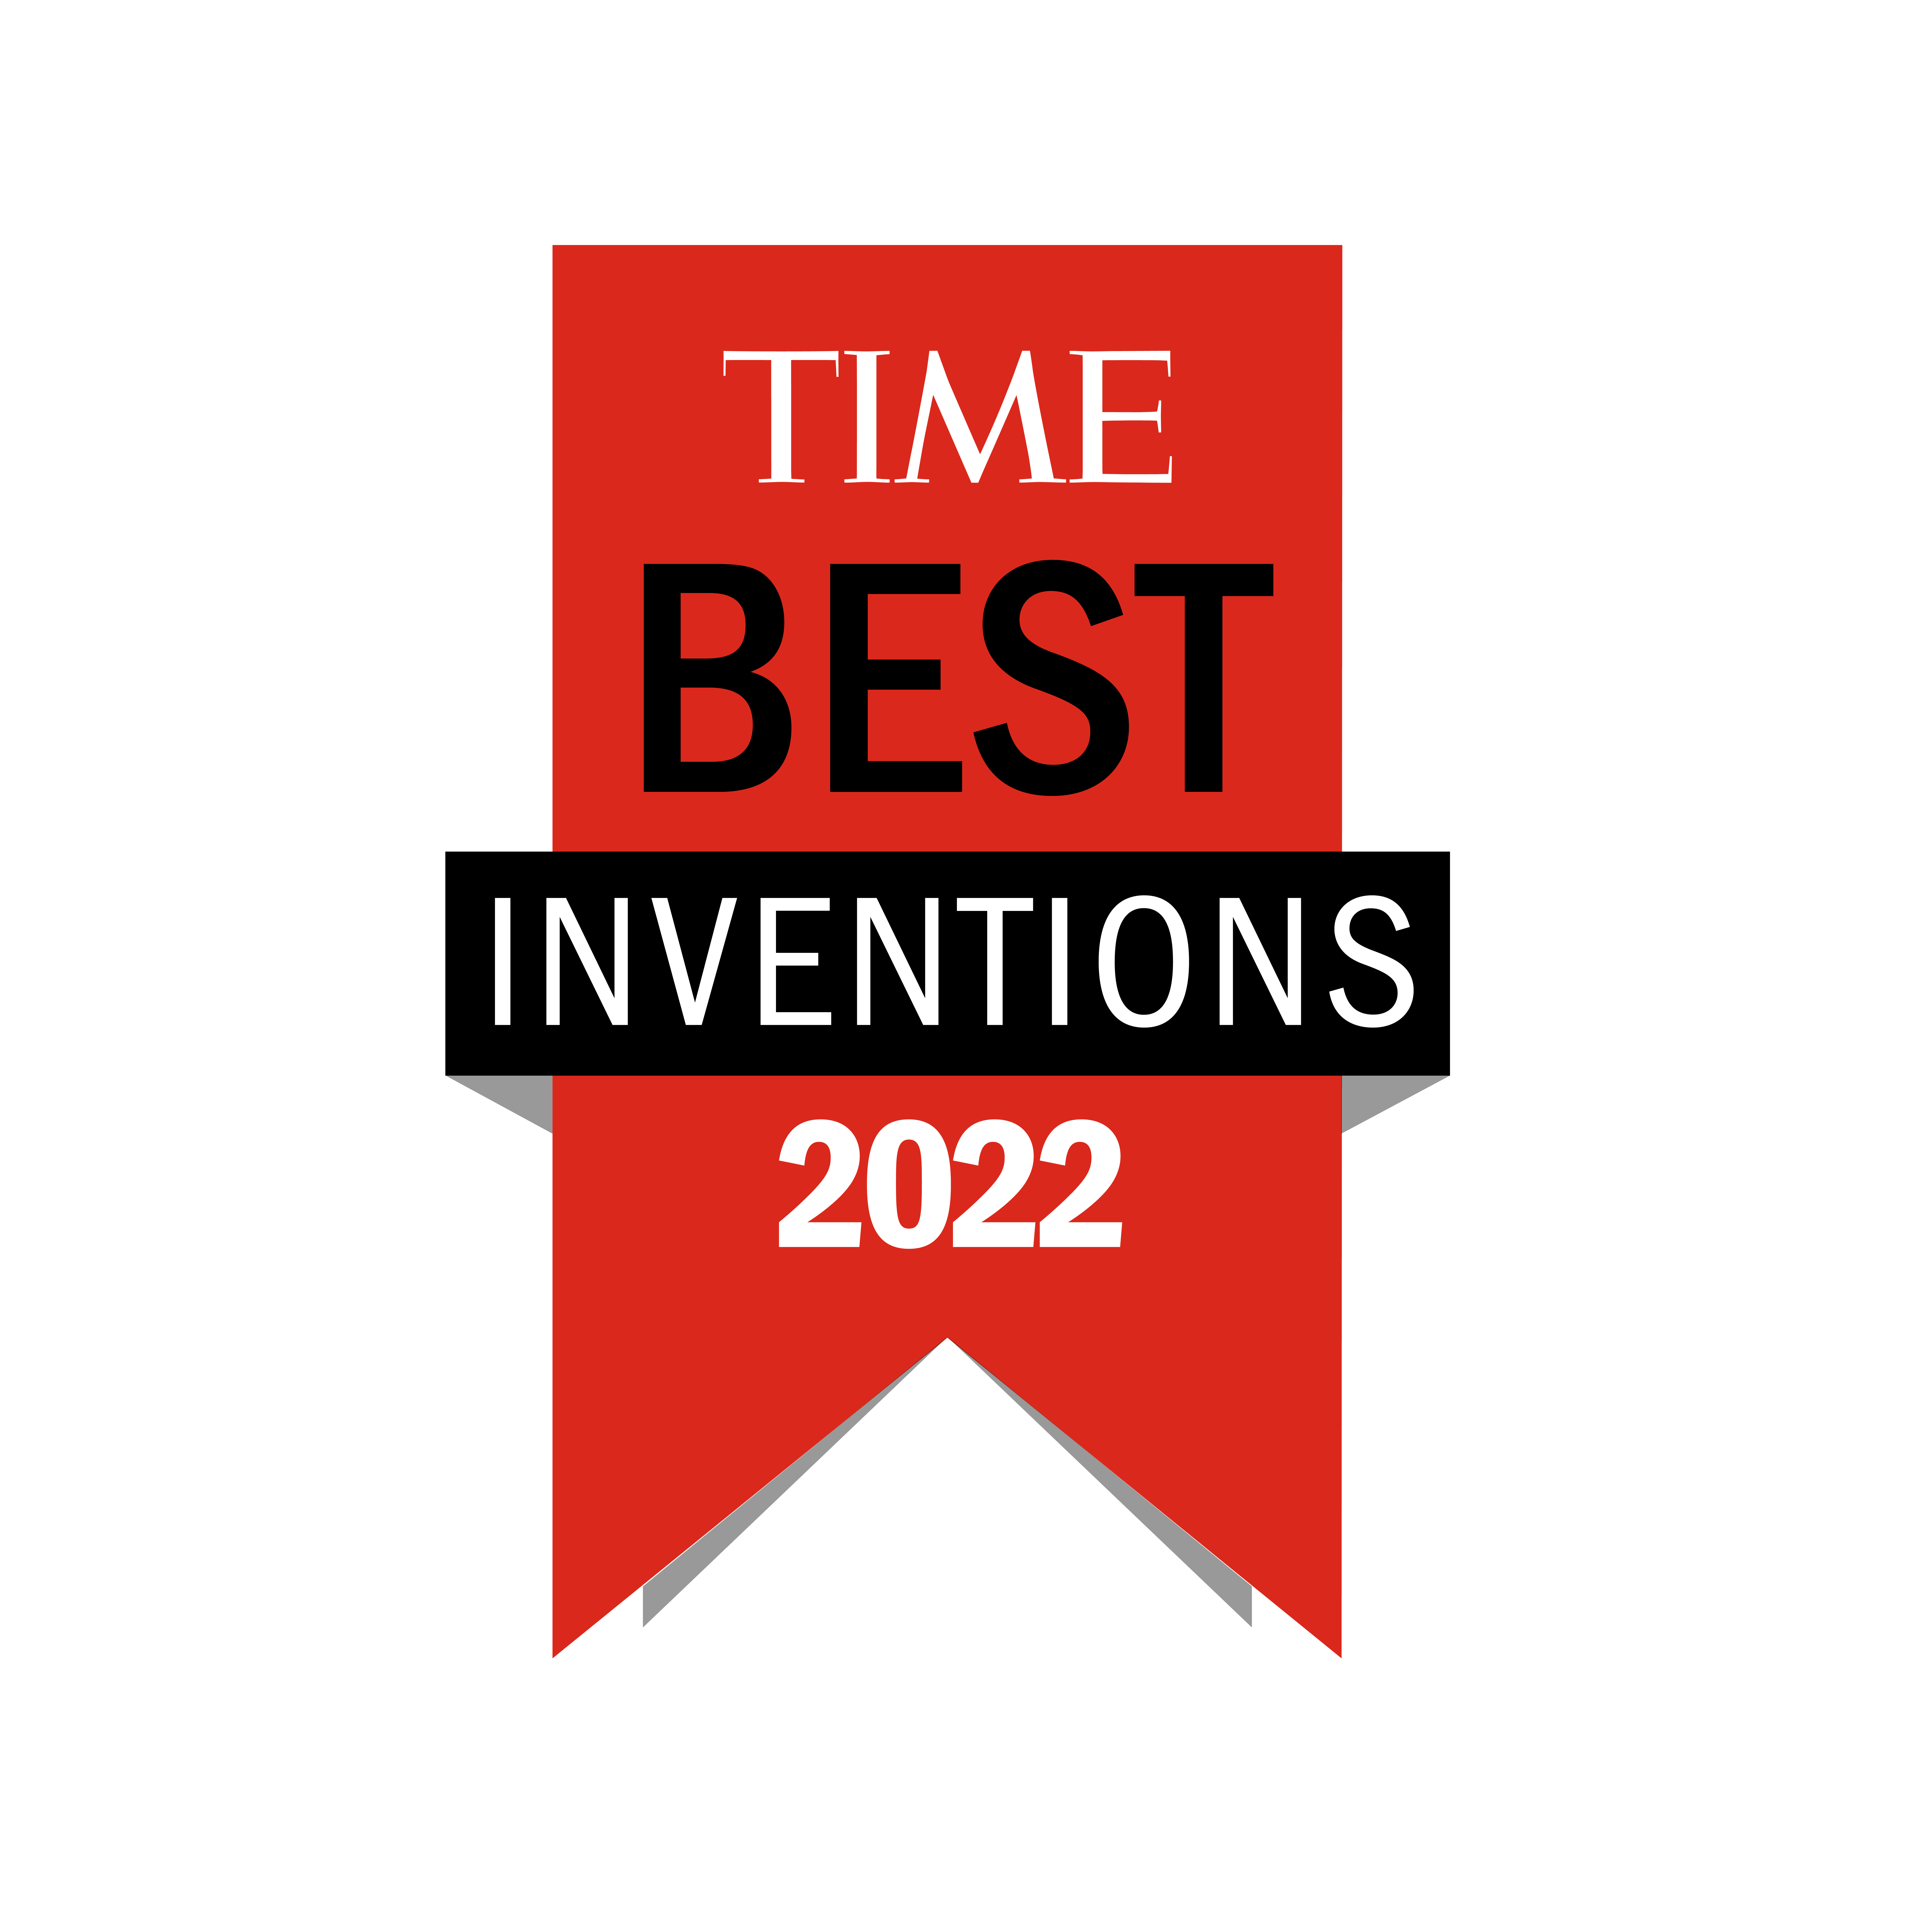 TIME Best Inventions 2022